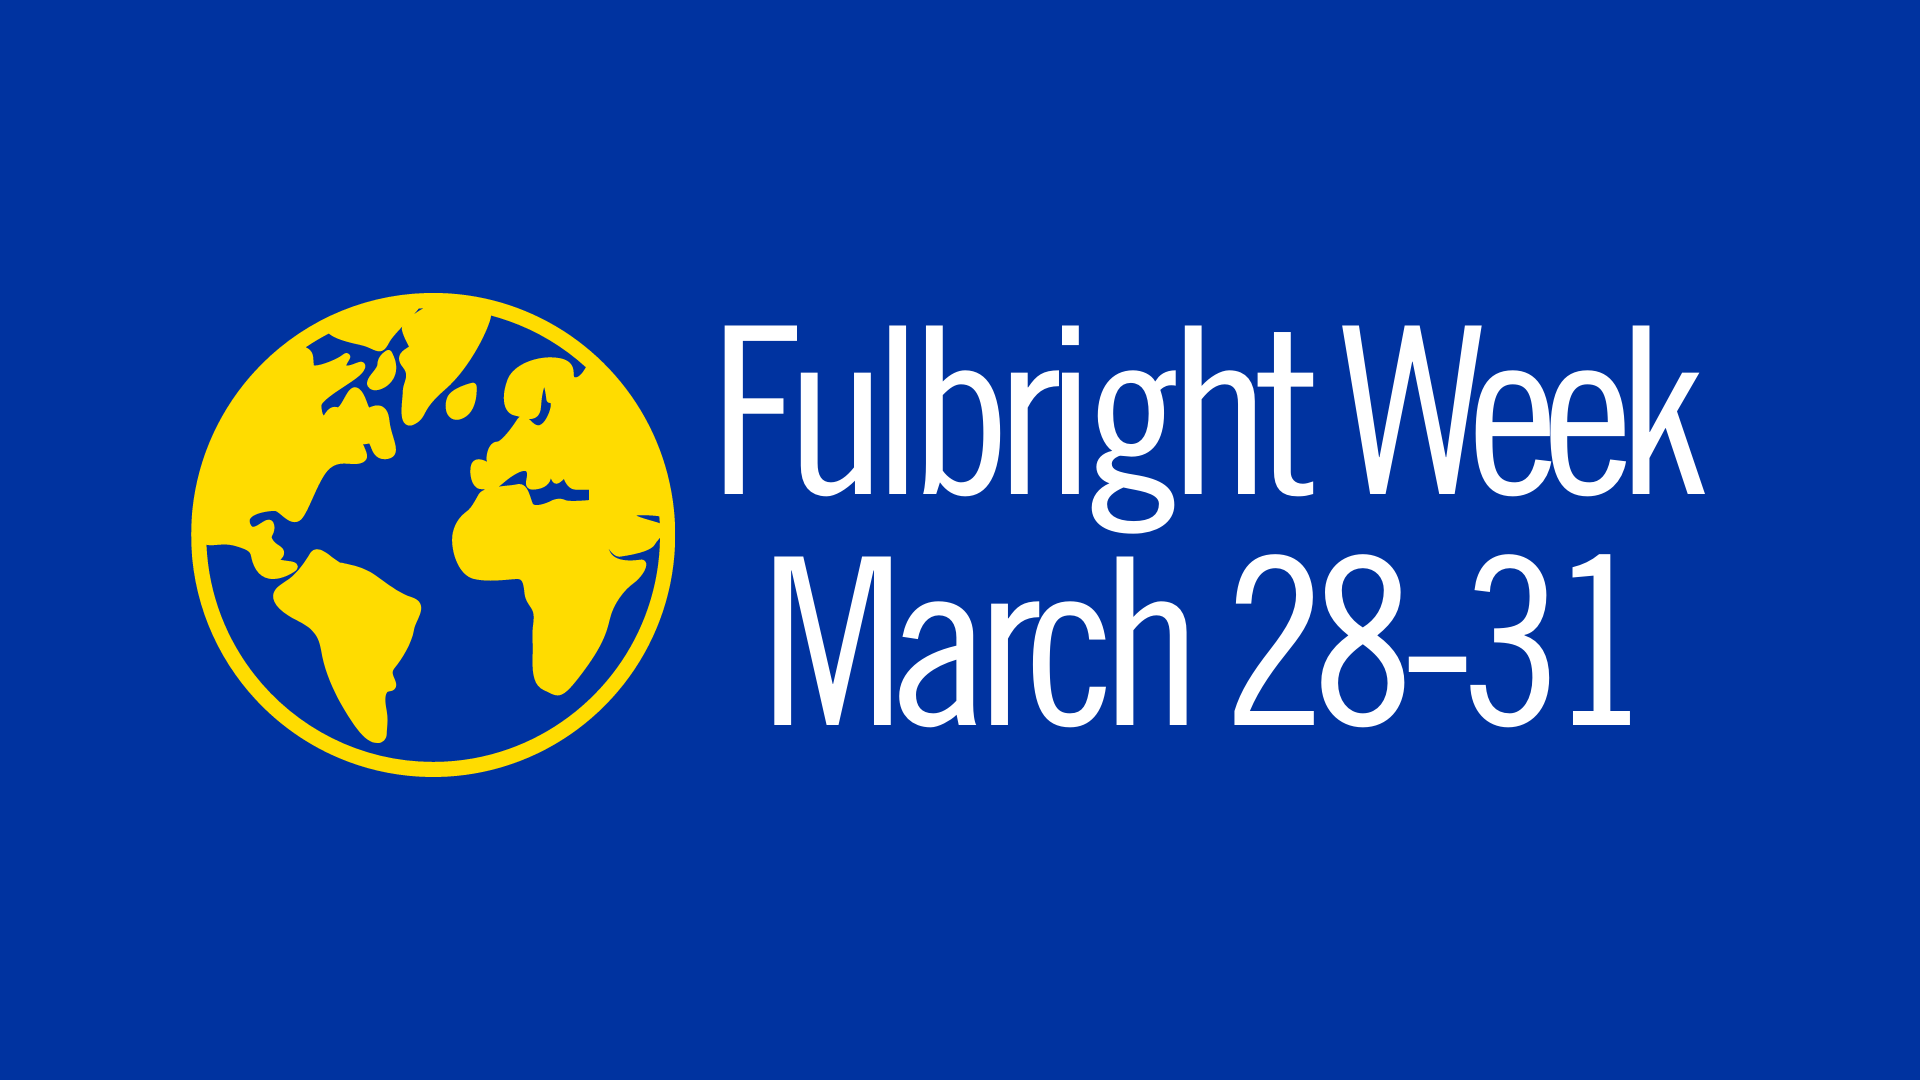 Fulbright Week March 28-31 and photo of globe